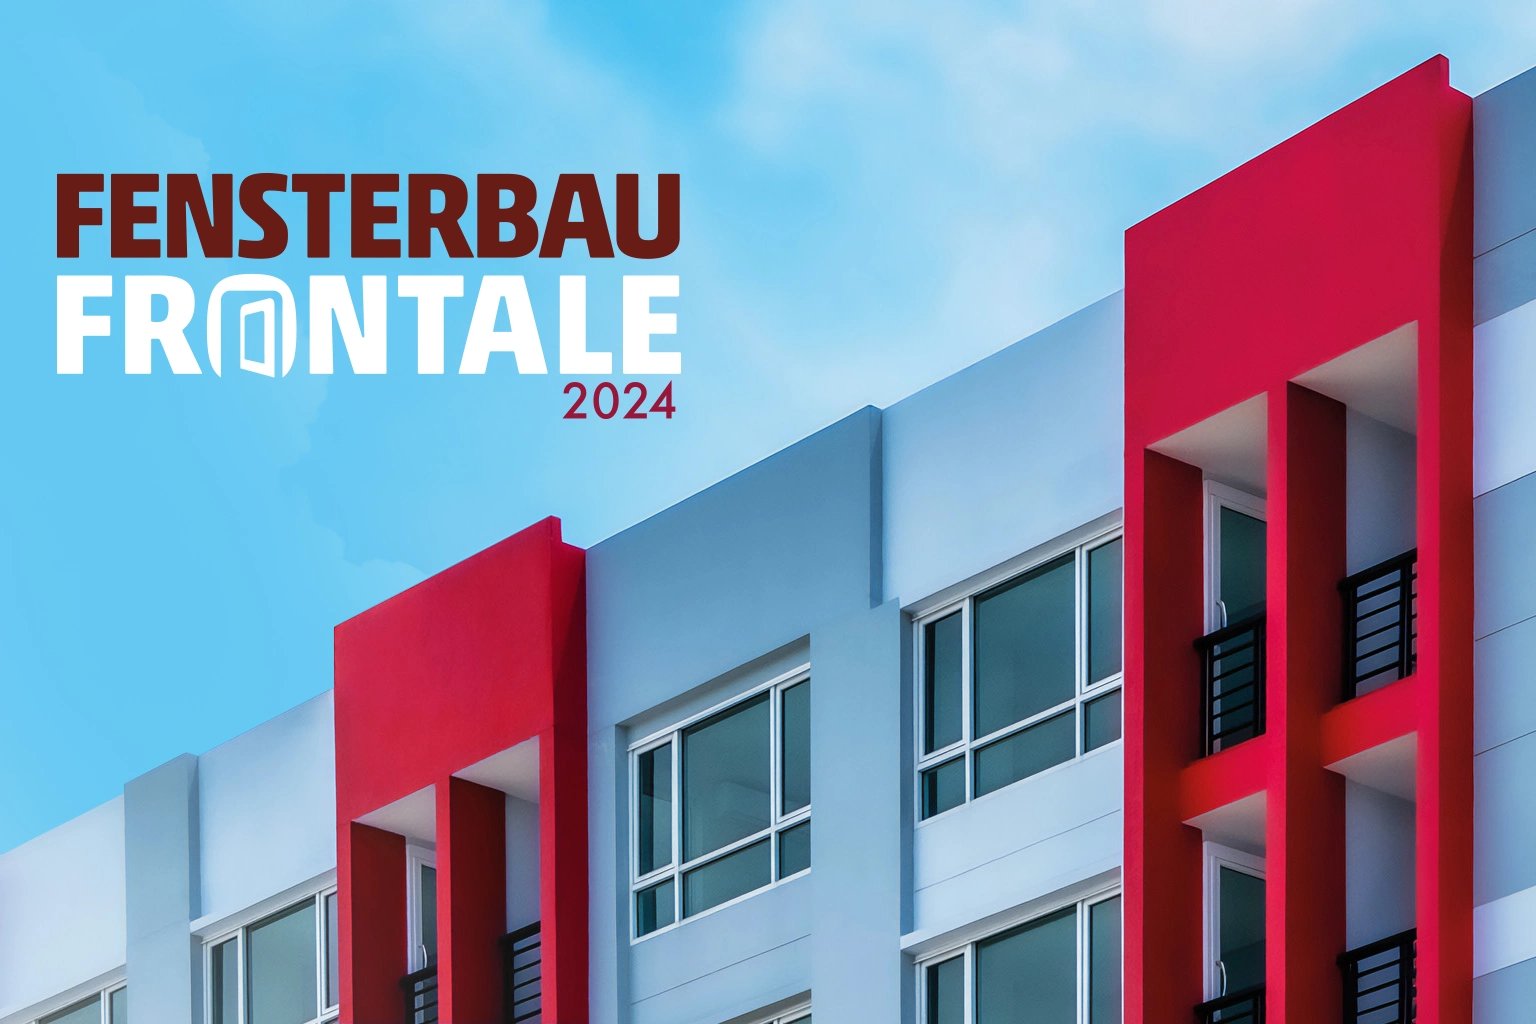 Guten Tag! We are going to FENSTERBAU FRONTALE 2024 in Nuremberg!